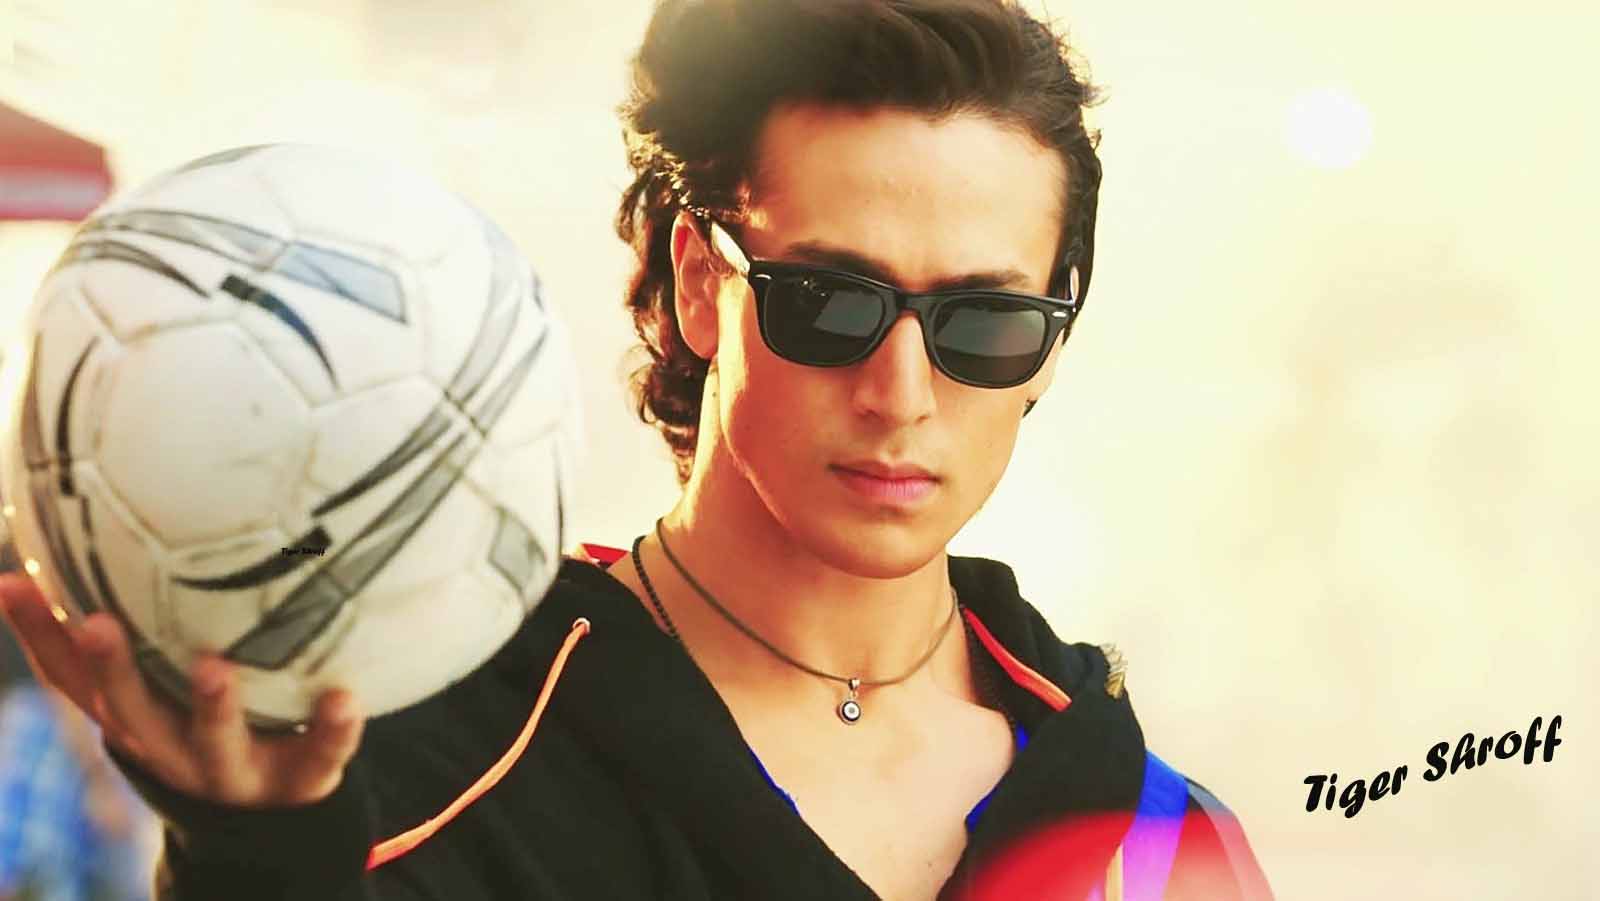 Tiger Shroff Play Footboll Wallpapers And Backgrounds - Tiger Shroff , HD Wallpaper & Backgrounds